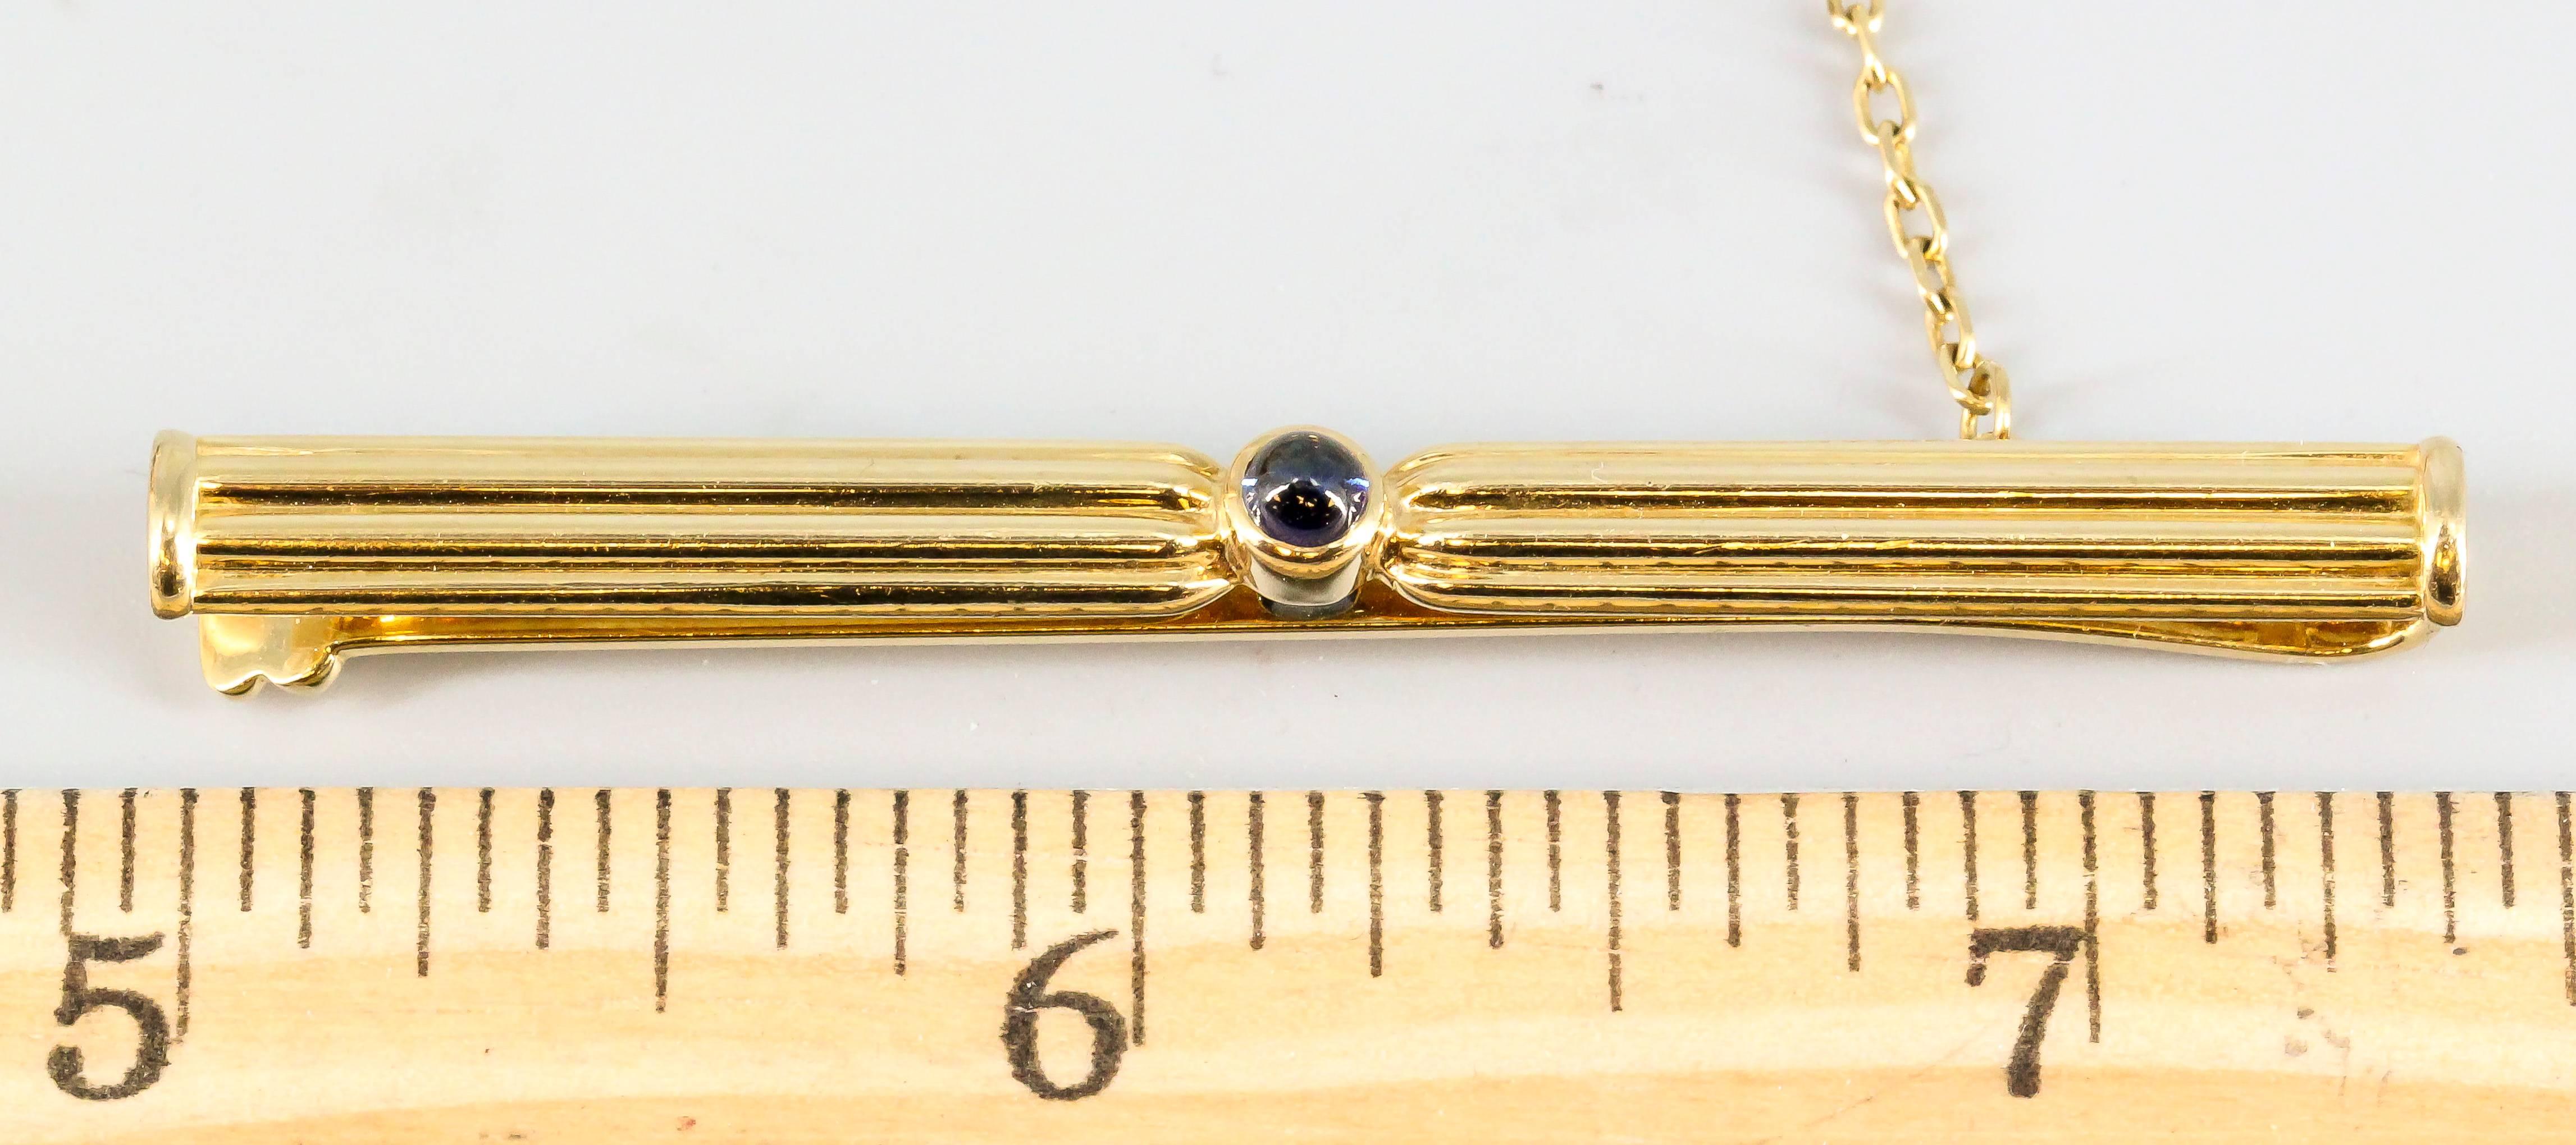 Distinctive cabochon sapphire and gold tie clip from the "Pasha" collection by Cartier circa 1991. It features a single rich blue cabochon sapphire in the middle, with a ribbed 18K yellow gold design. Handsome and craftily made.  Comes